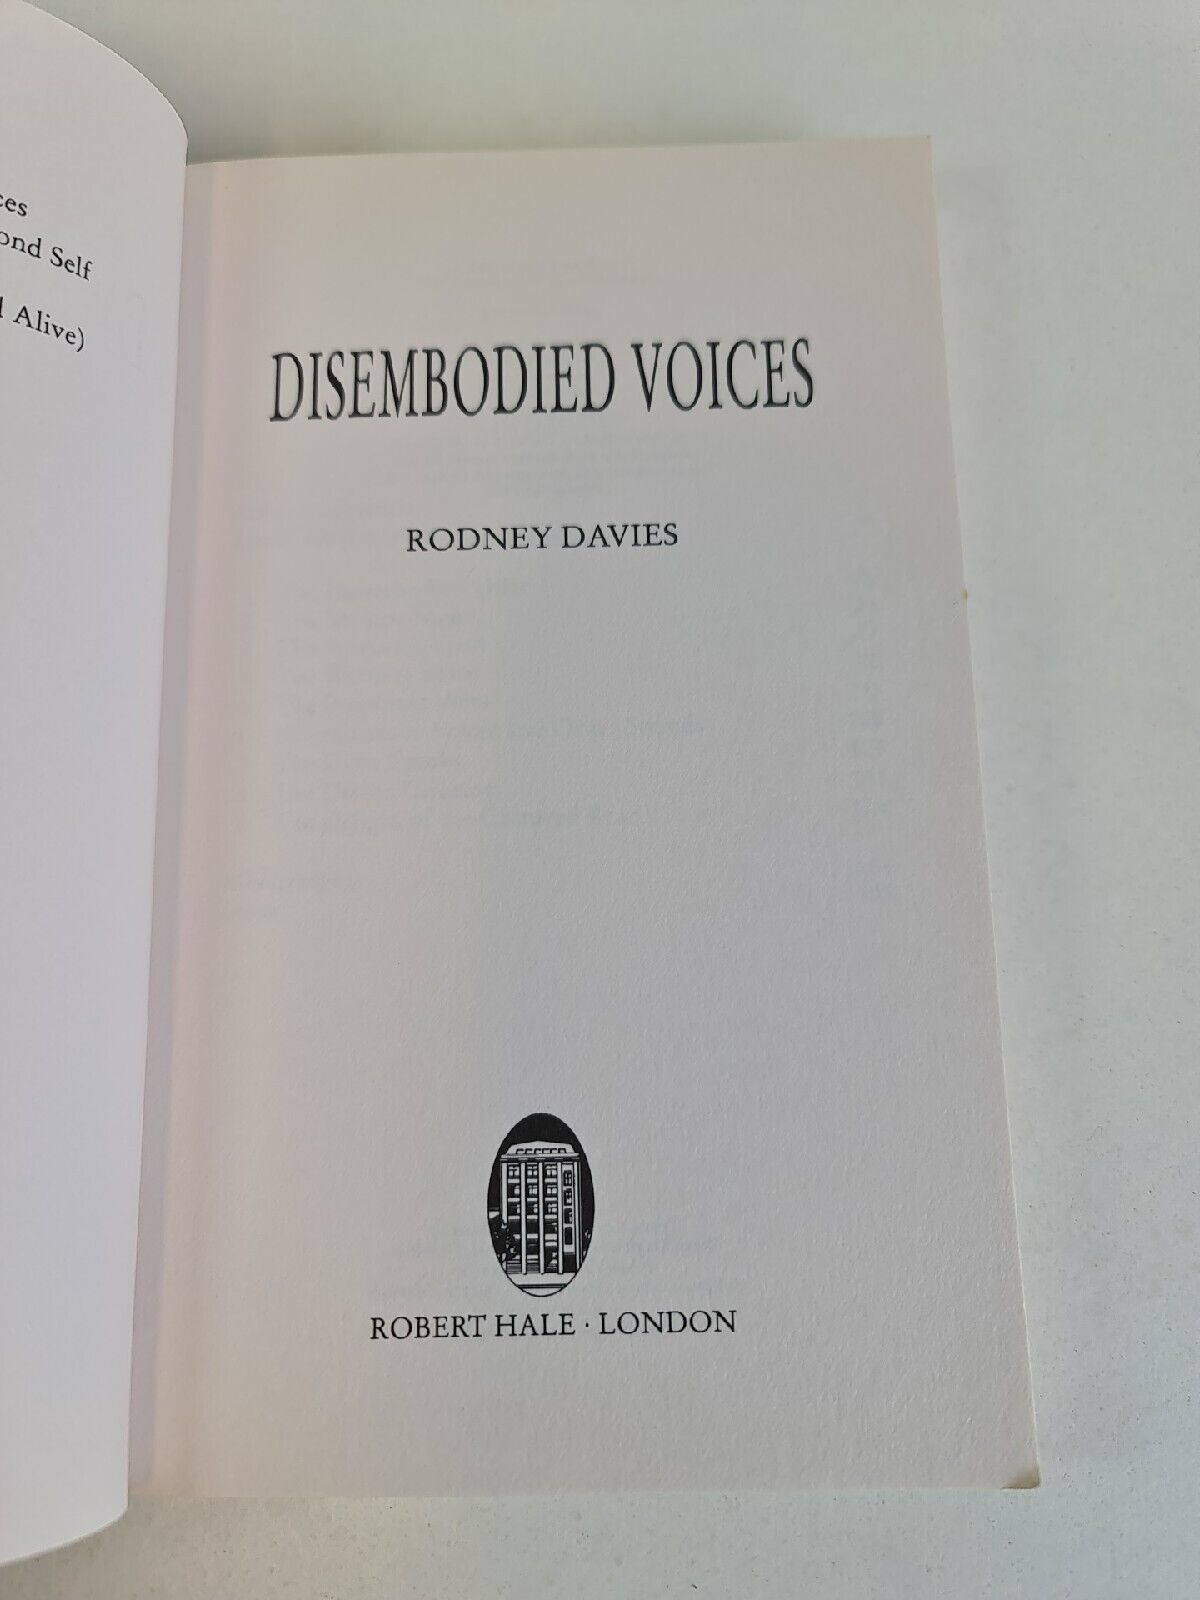 From the Other World: Disembodied Voices by Rodney Davies (2005)